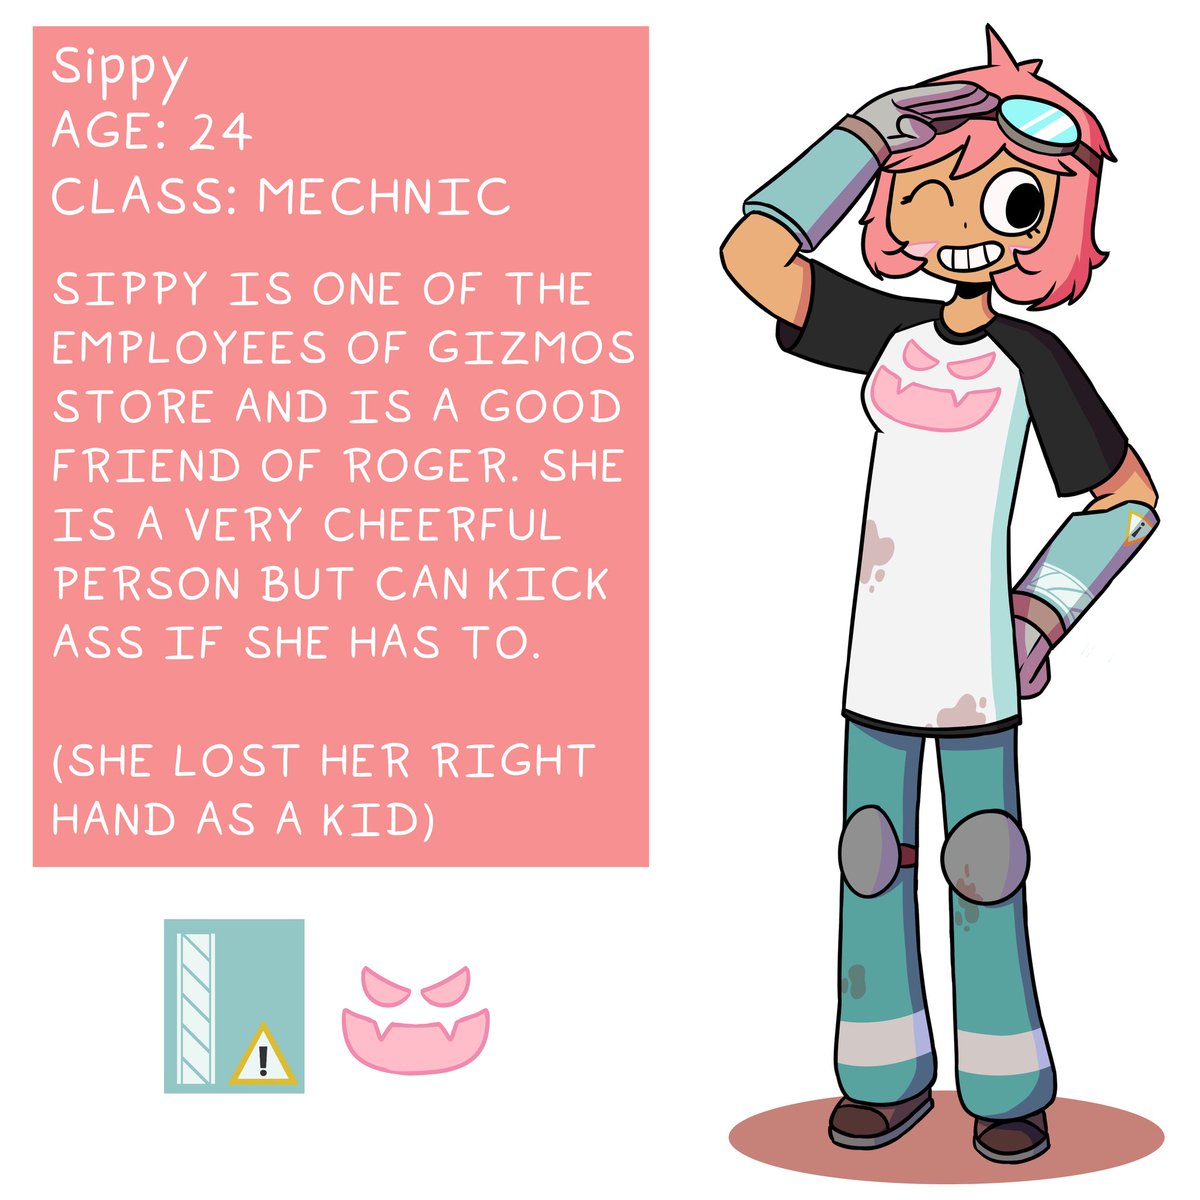 Here's the next character Sippy! #digitalart  #dungeondrifters